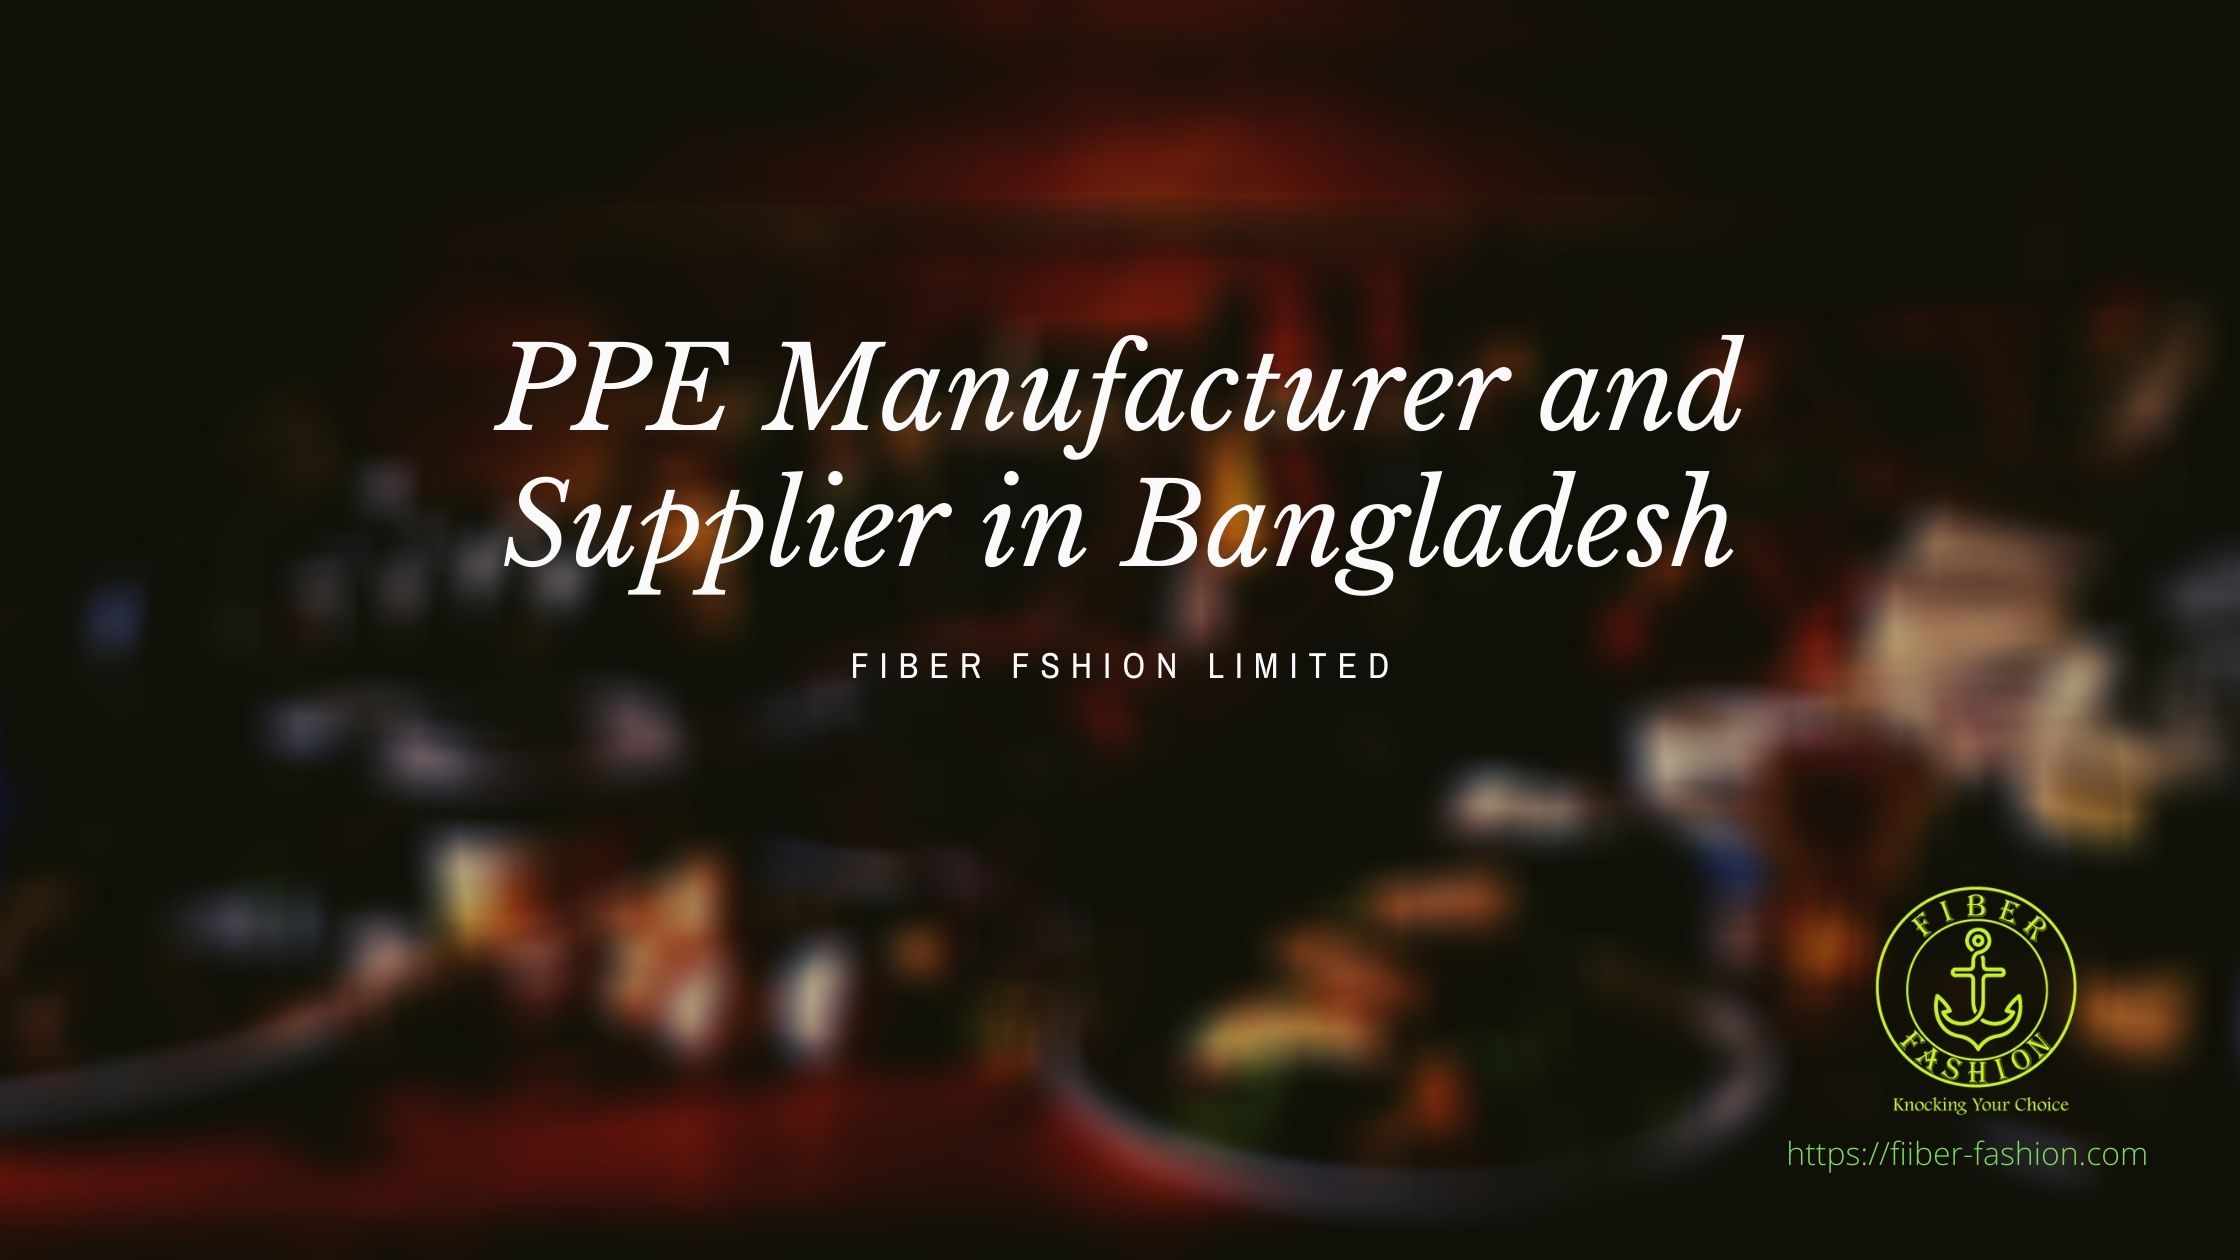 PPE Manufacturer and Supplier in Bangladesh